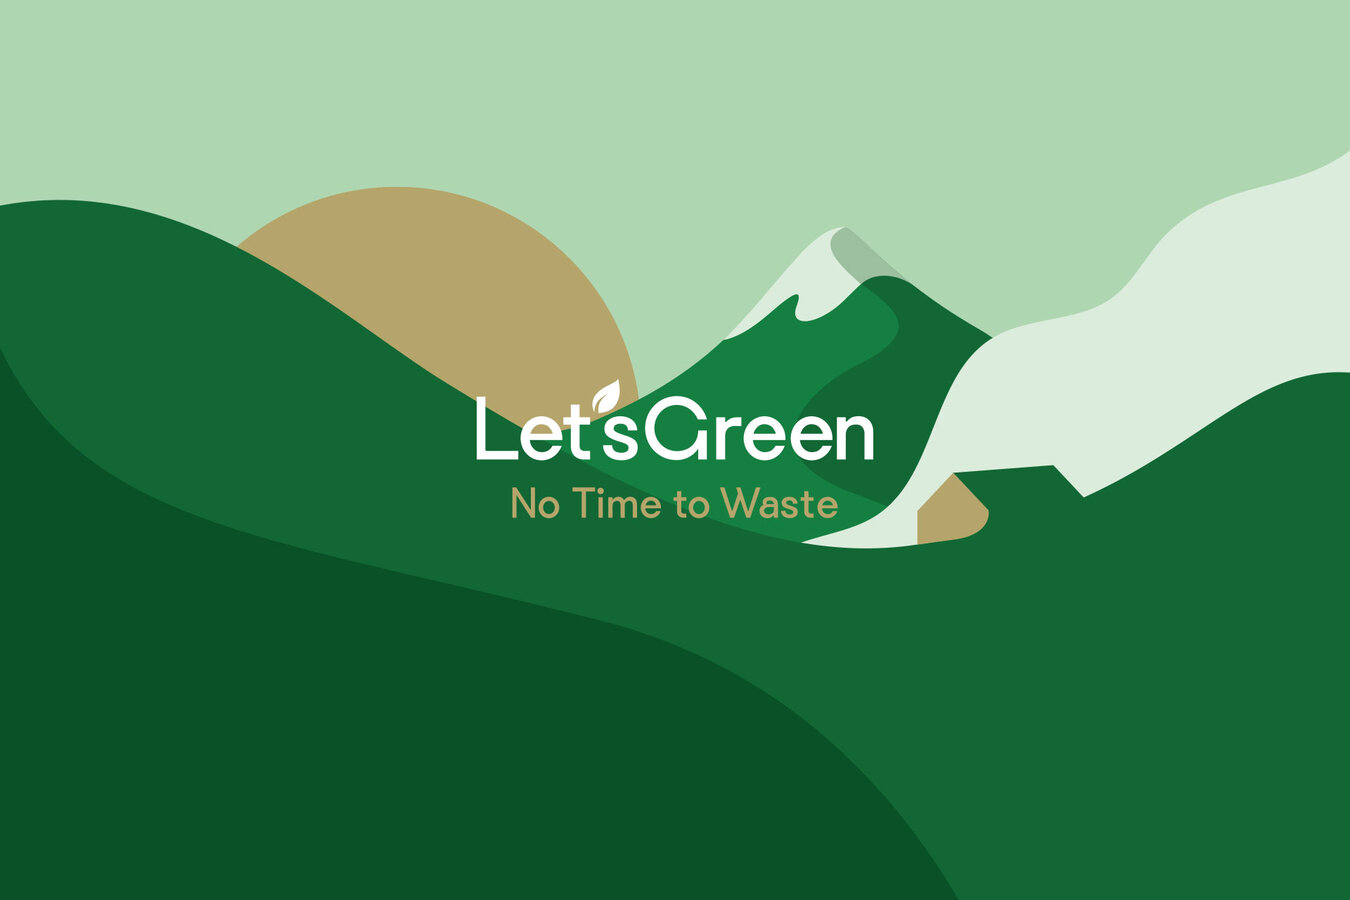 Let’s Green